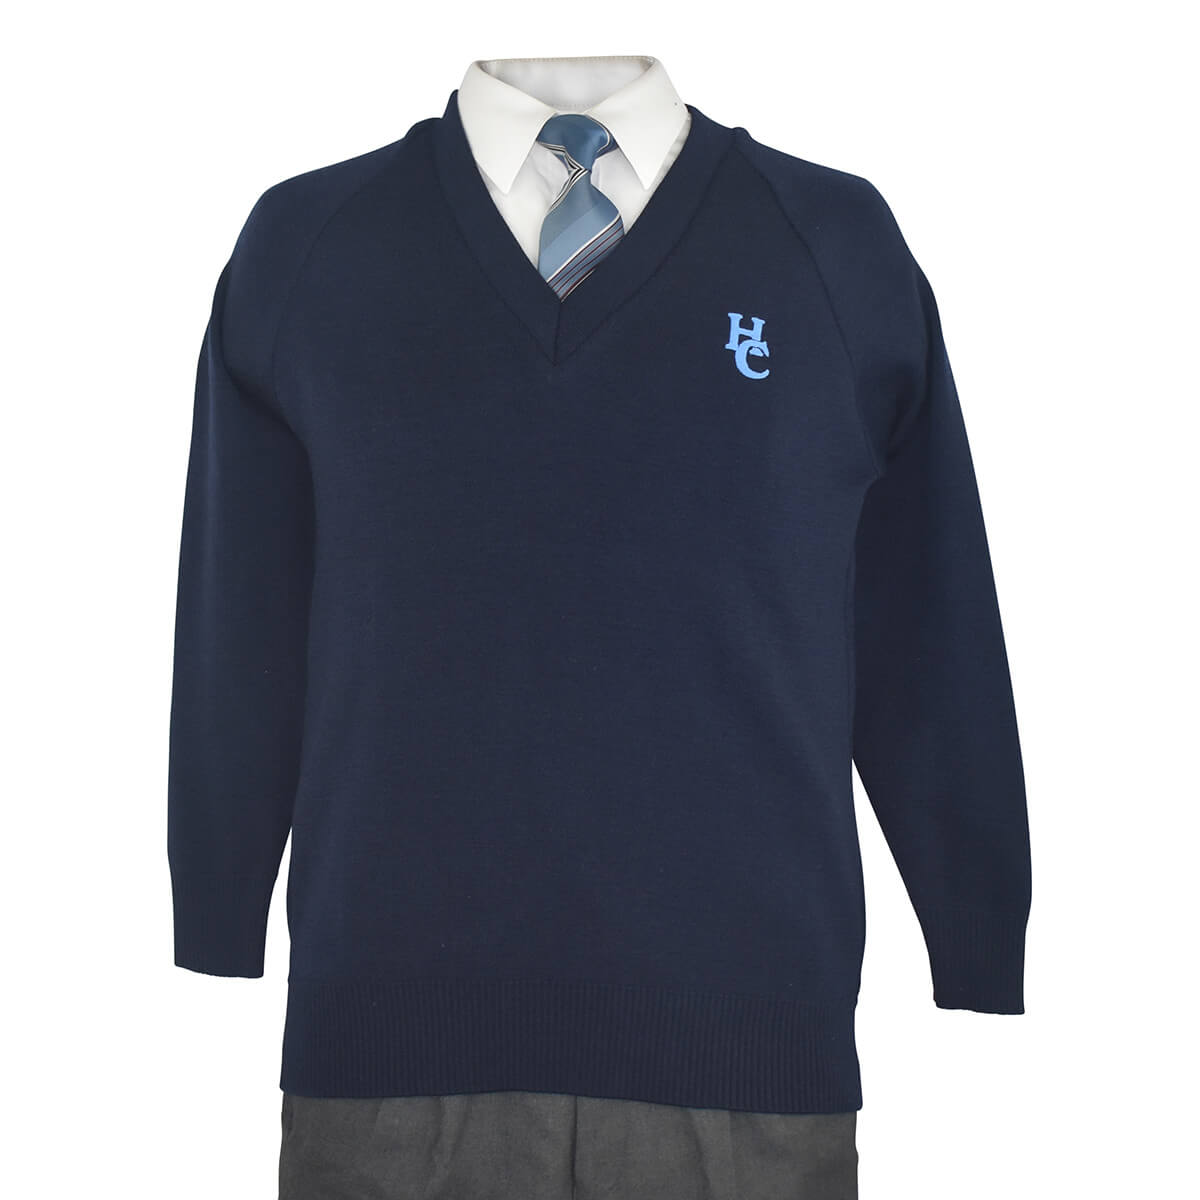 Hoppers Crossing Pullover Jnr | Hoppers Crossing Secondary College | Noone